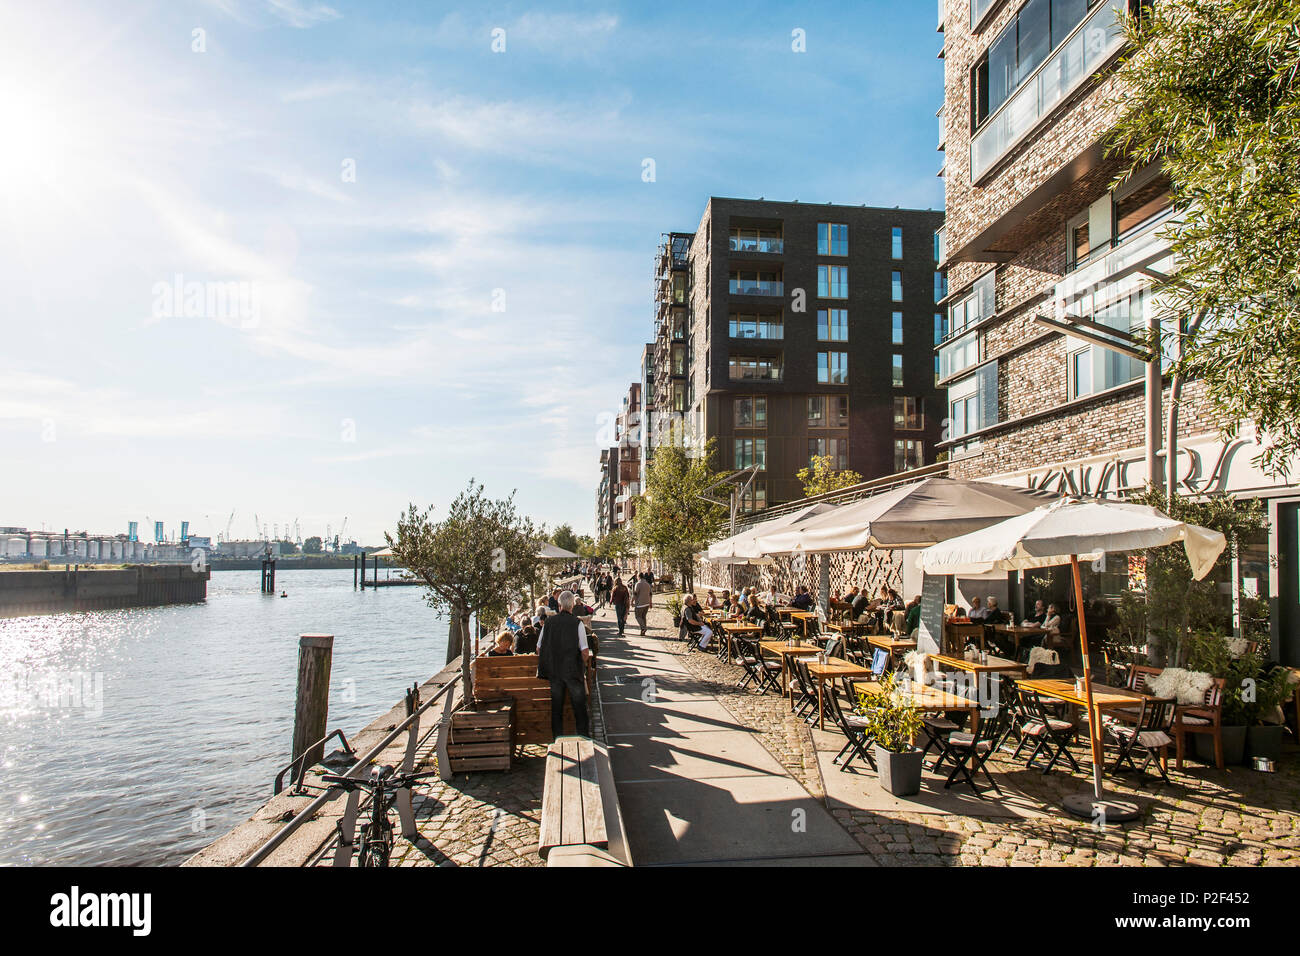 People chilling at the Dalmannkai in the Hafencity of Hamburg, north Germany, Germany Stock Photo